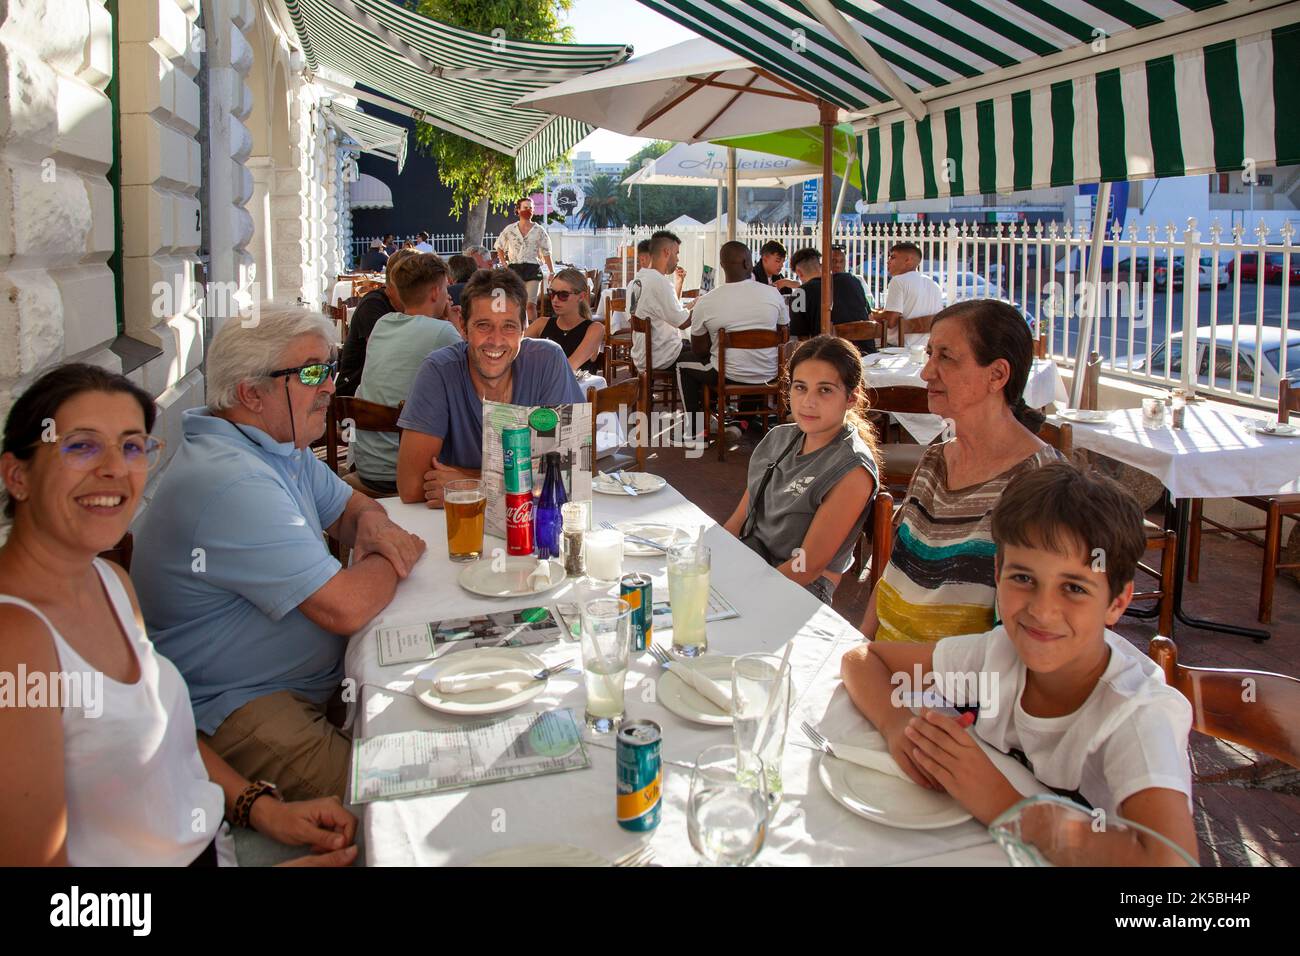 Family Dining at Posticino Restaurant in Sea Point, Cape Town  - South Africa Stock Photo